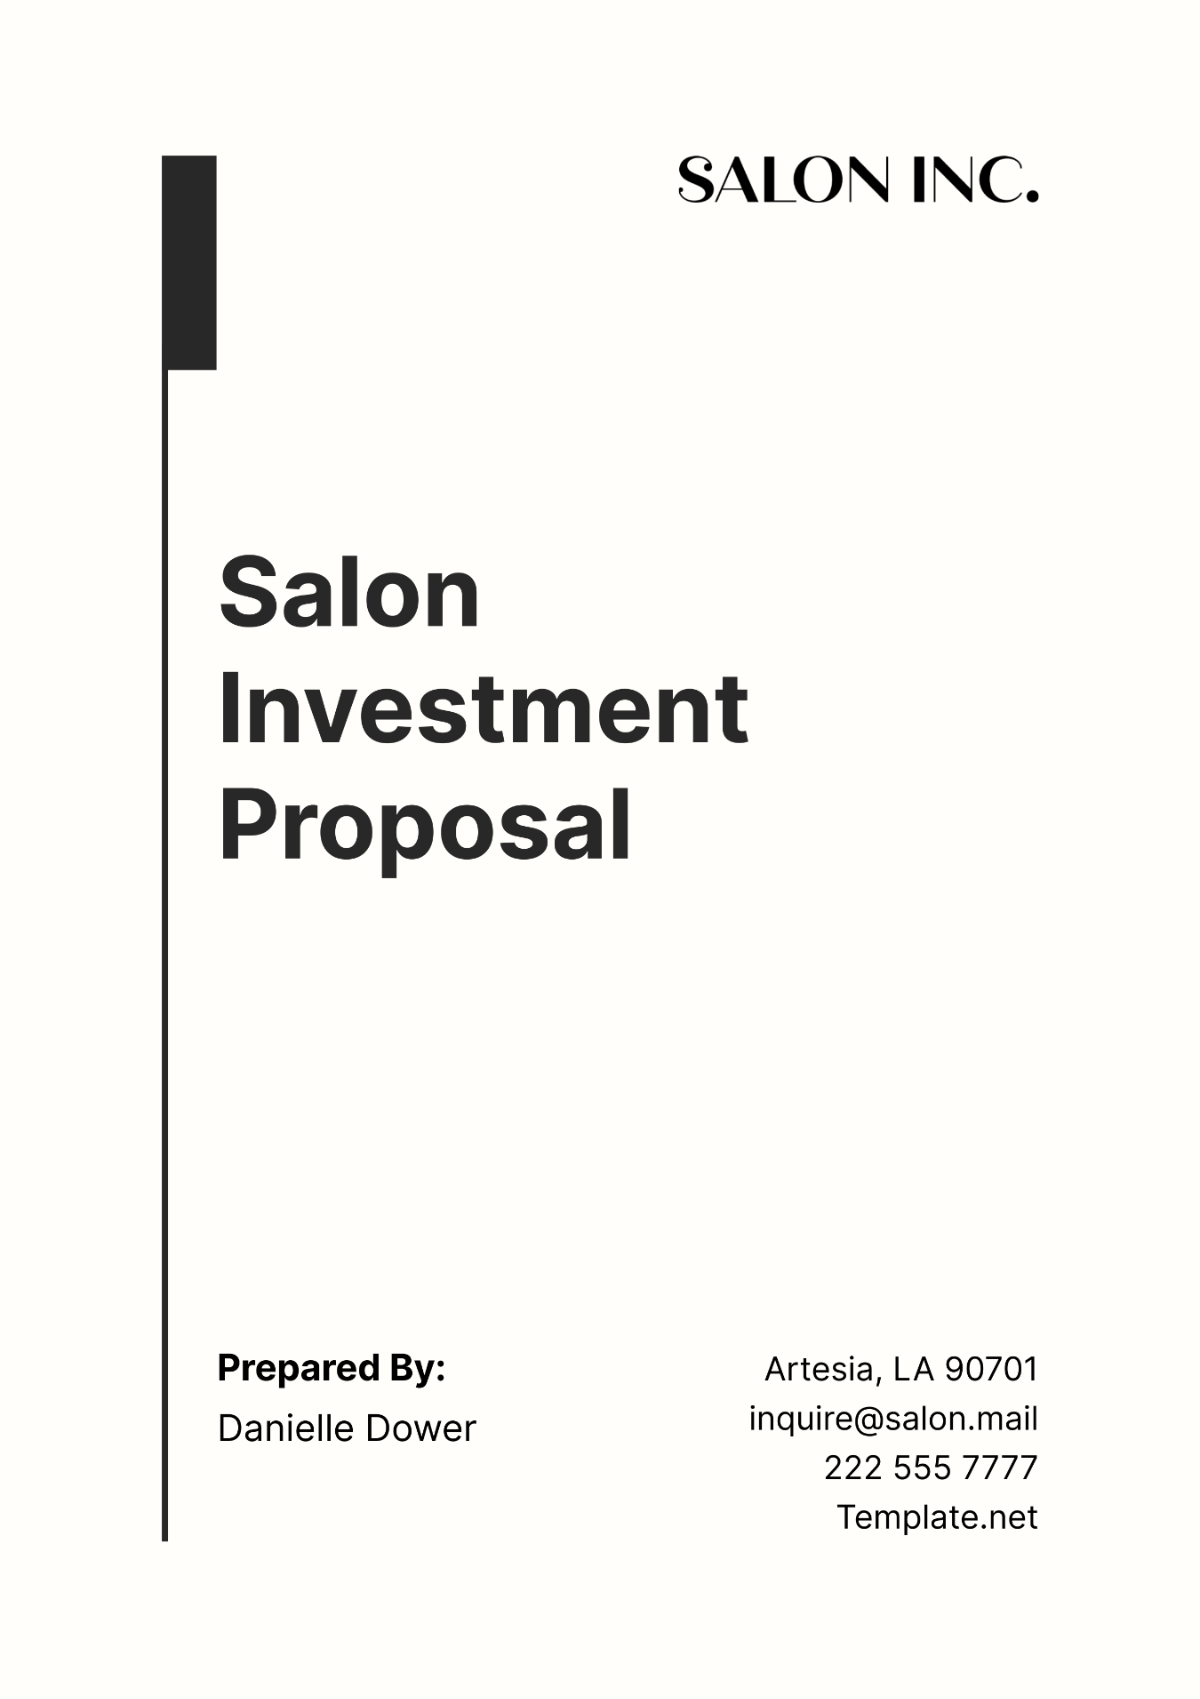 Free Salon Investment Proposal Template